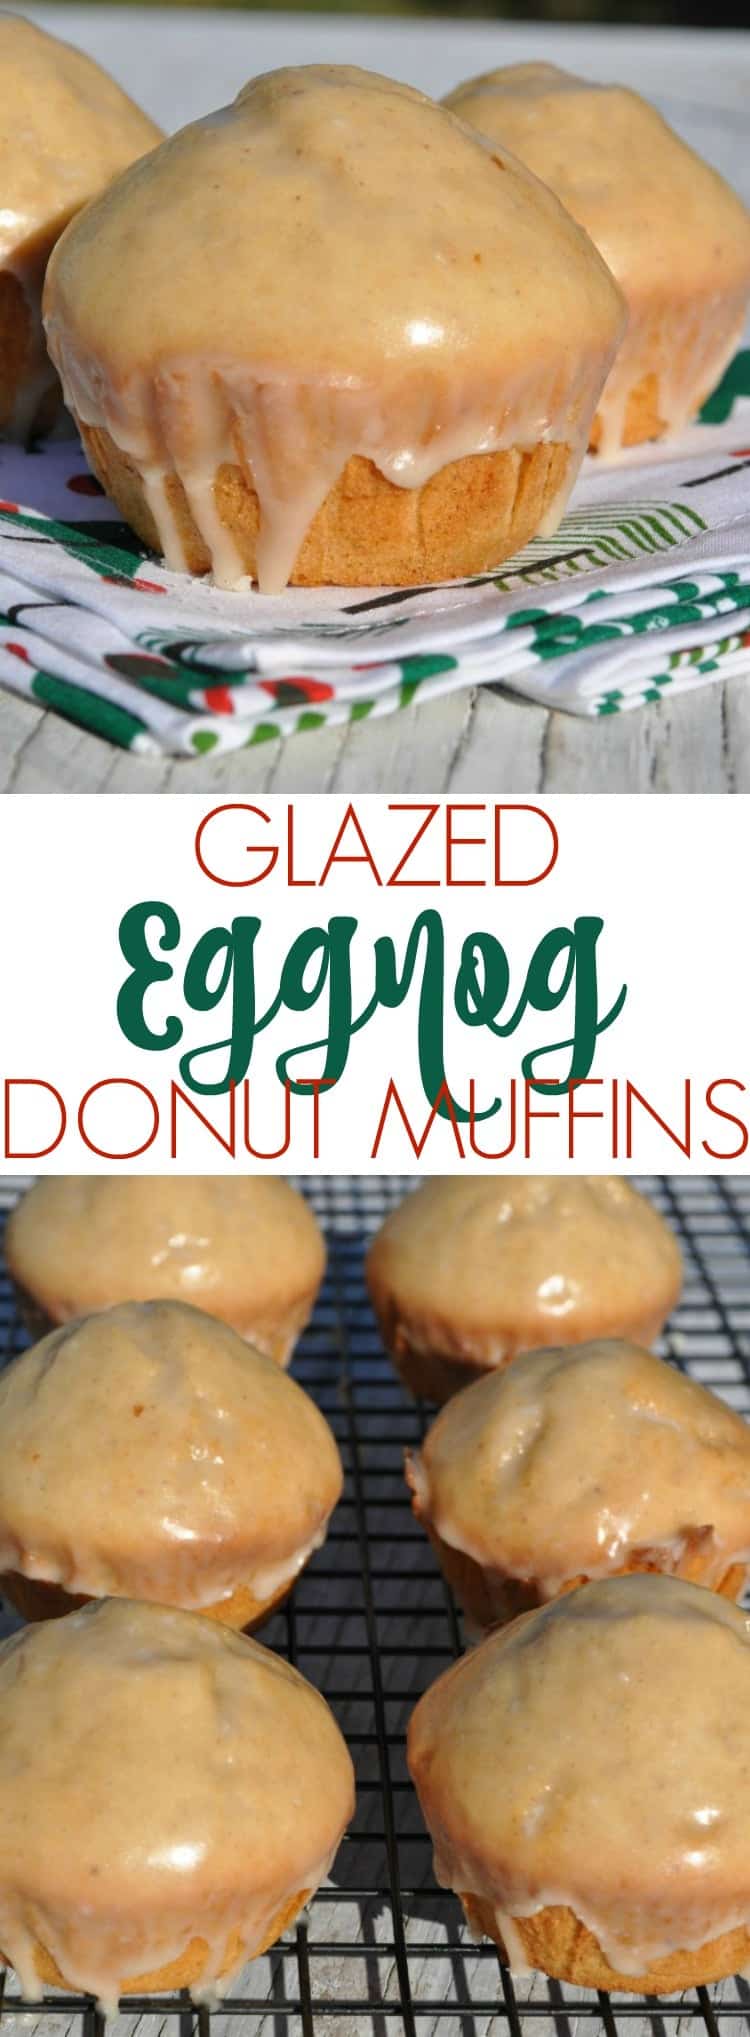 Glazed Eggnog Donut Muffins are an easy make-ahead breakfast or brunch to celebrate the Christmas season. Perfect with coffee!